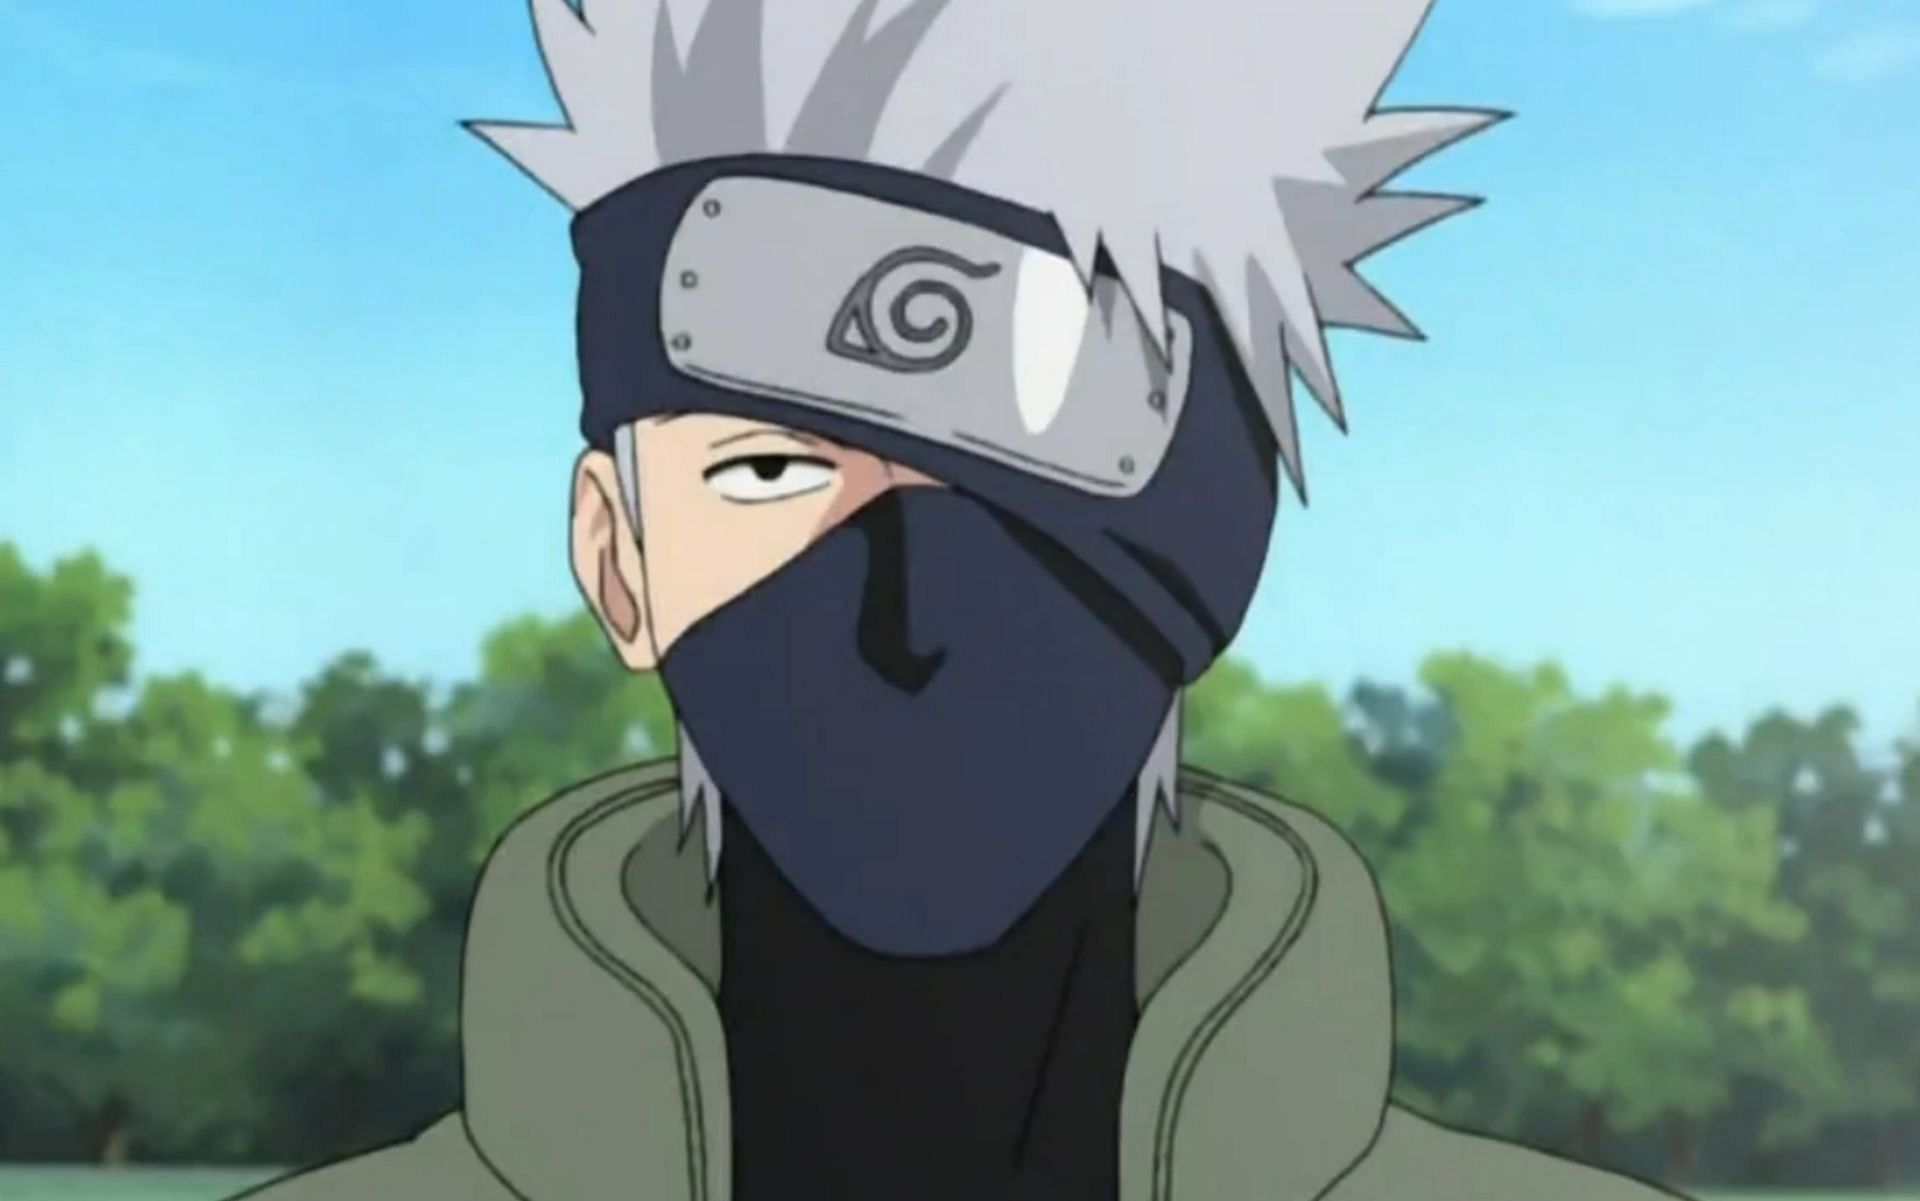 Kakashi was relieved from the Anbu by Third Hokage in Naruto (Image via Studio Pierrot)